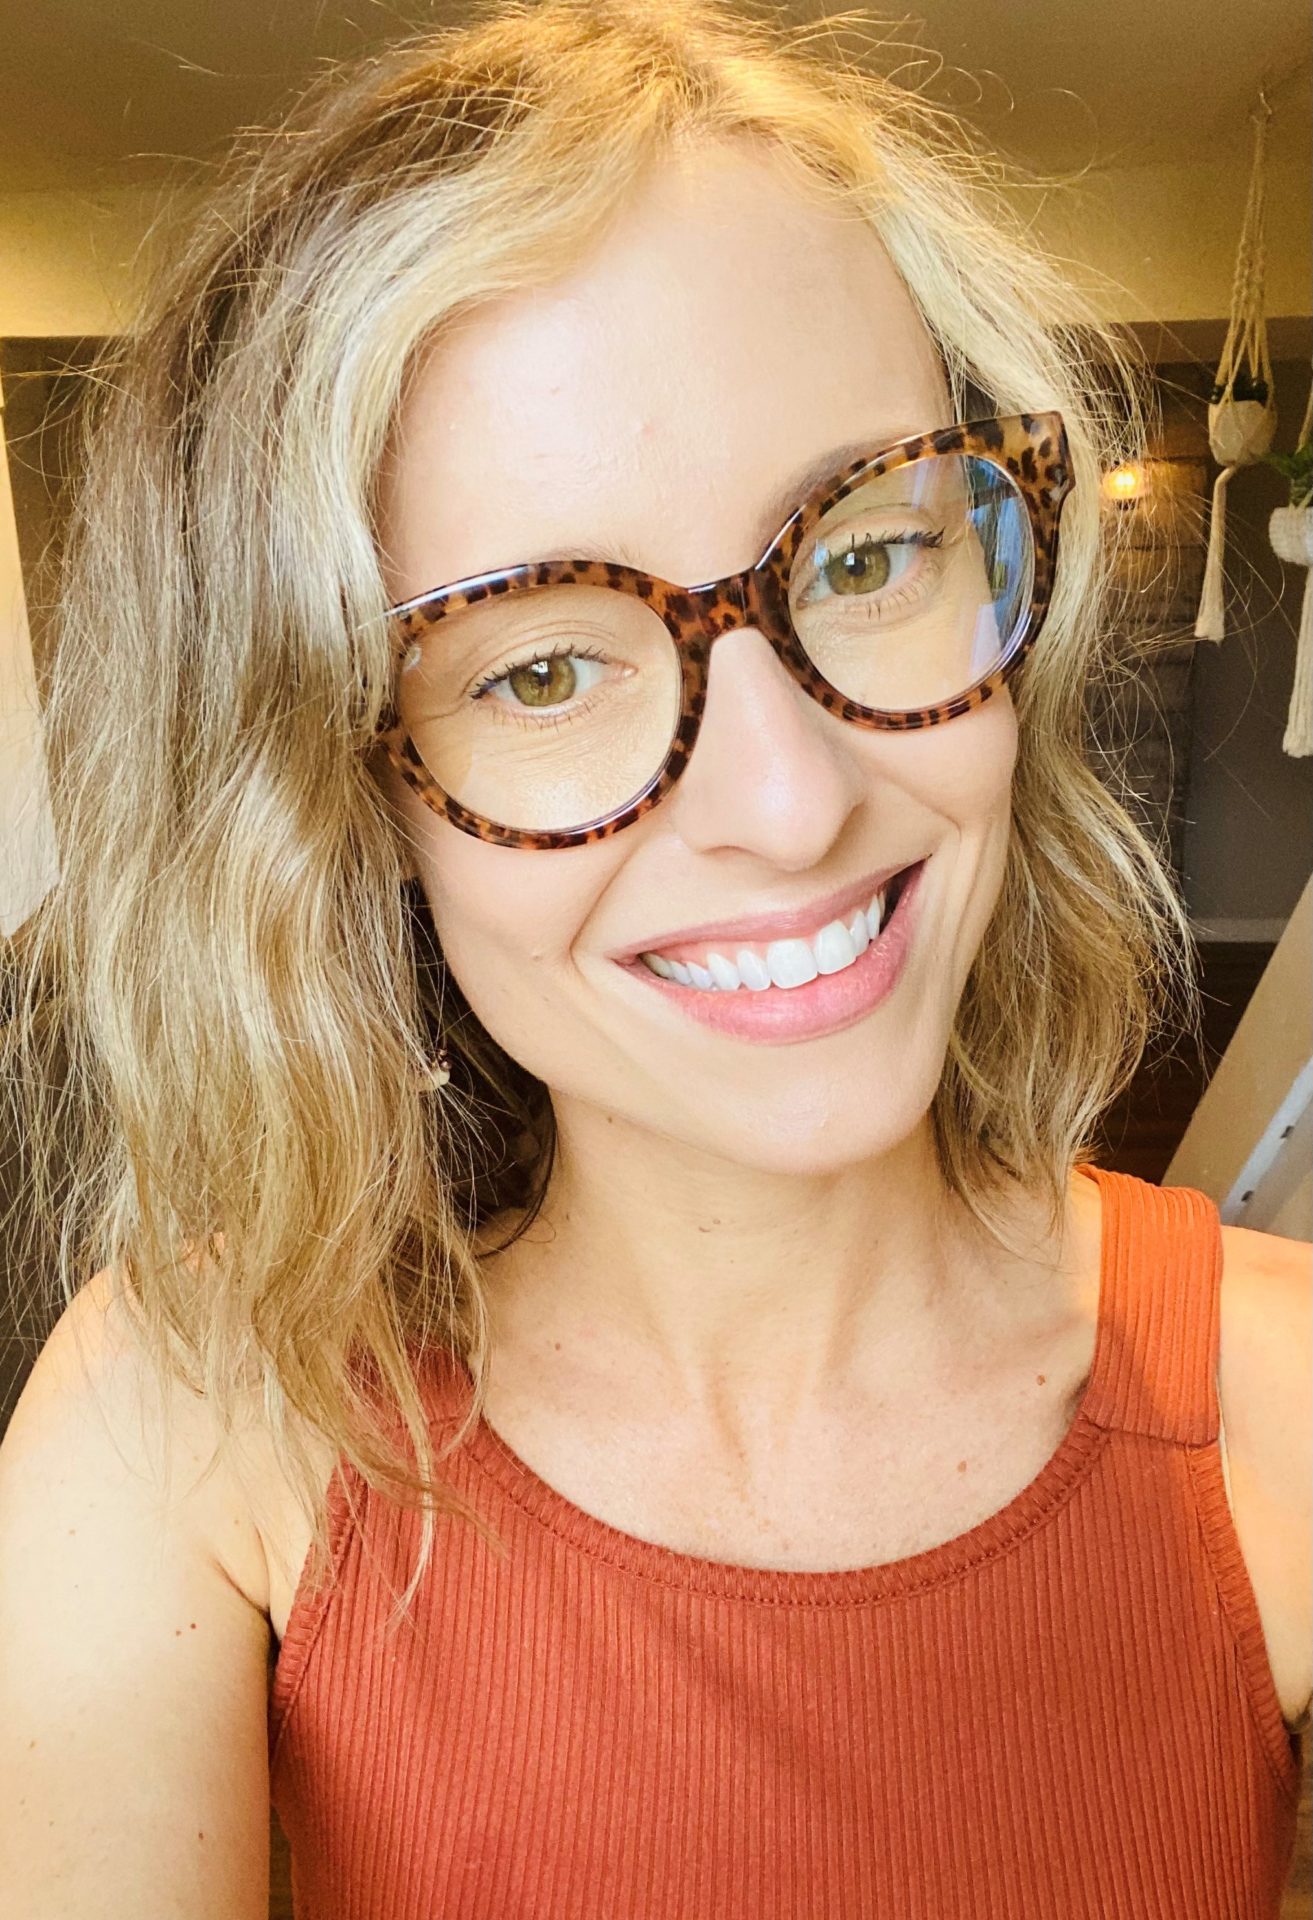 Photo of a woman wearing an orange tank top and brown glasses